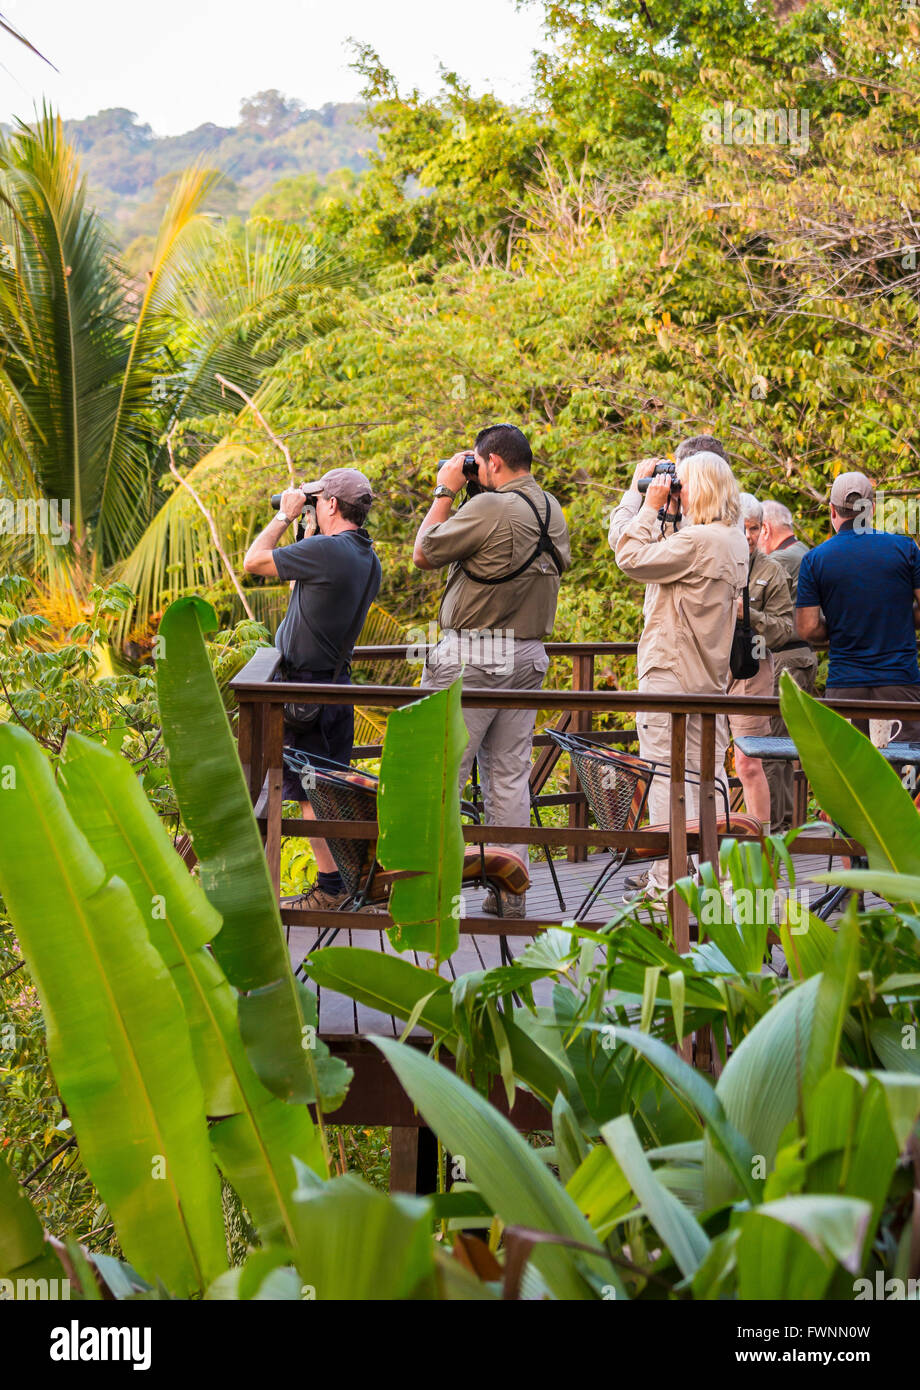 OSA PENINSULA, COSTA RICA - Eco-tourists viewing wildlife in rain forest. Stock Photo